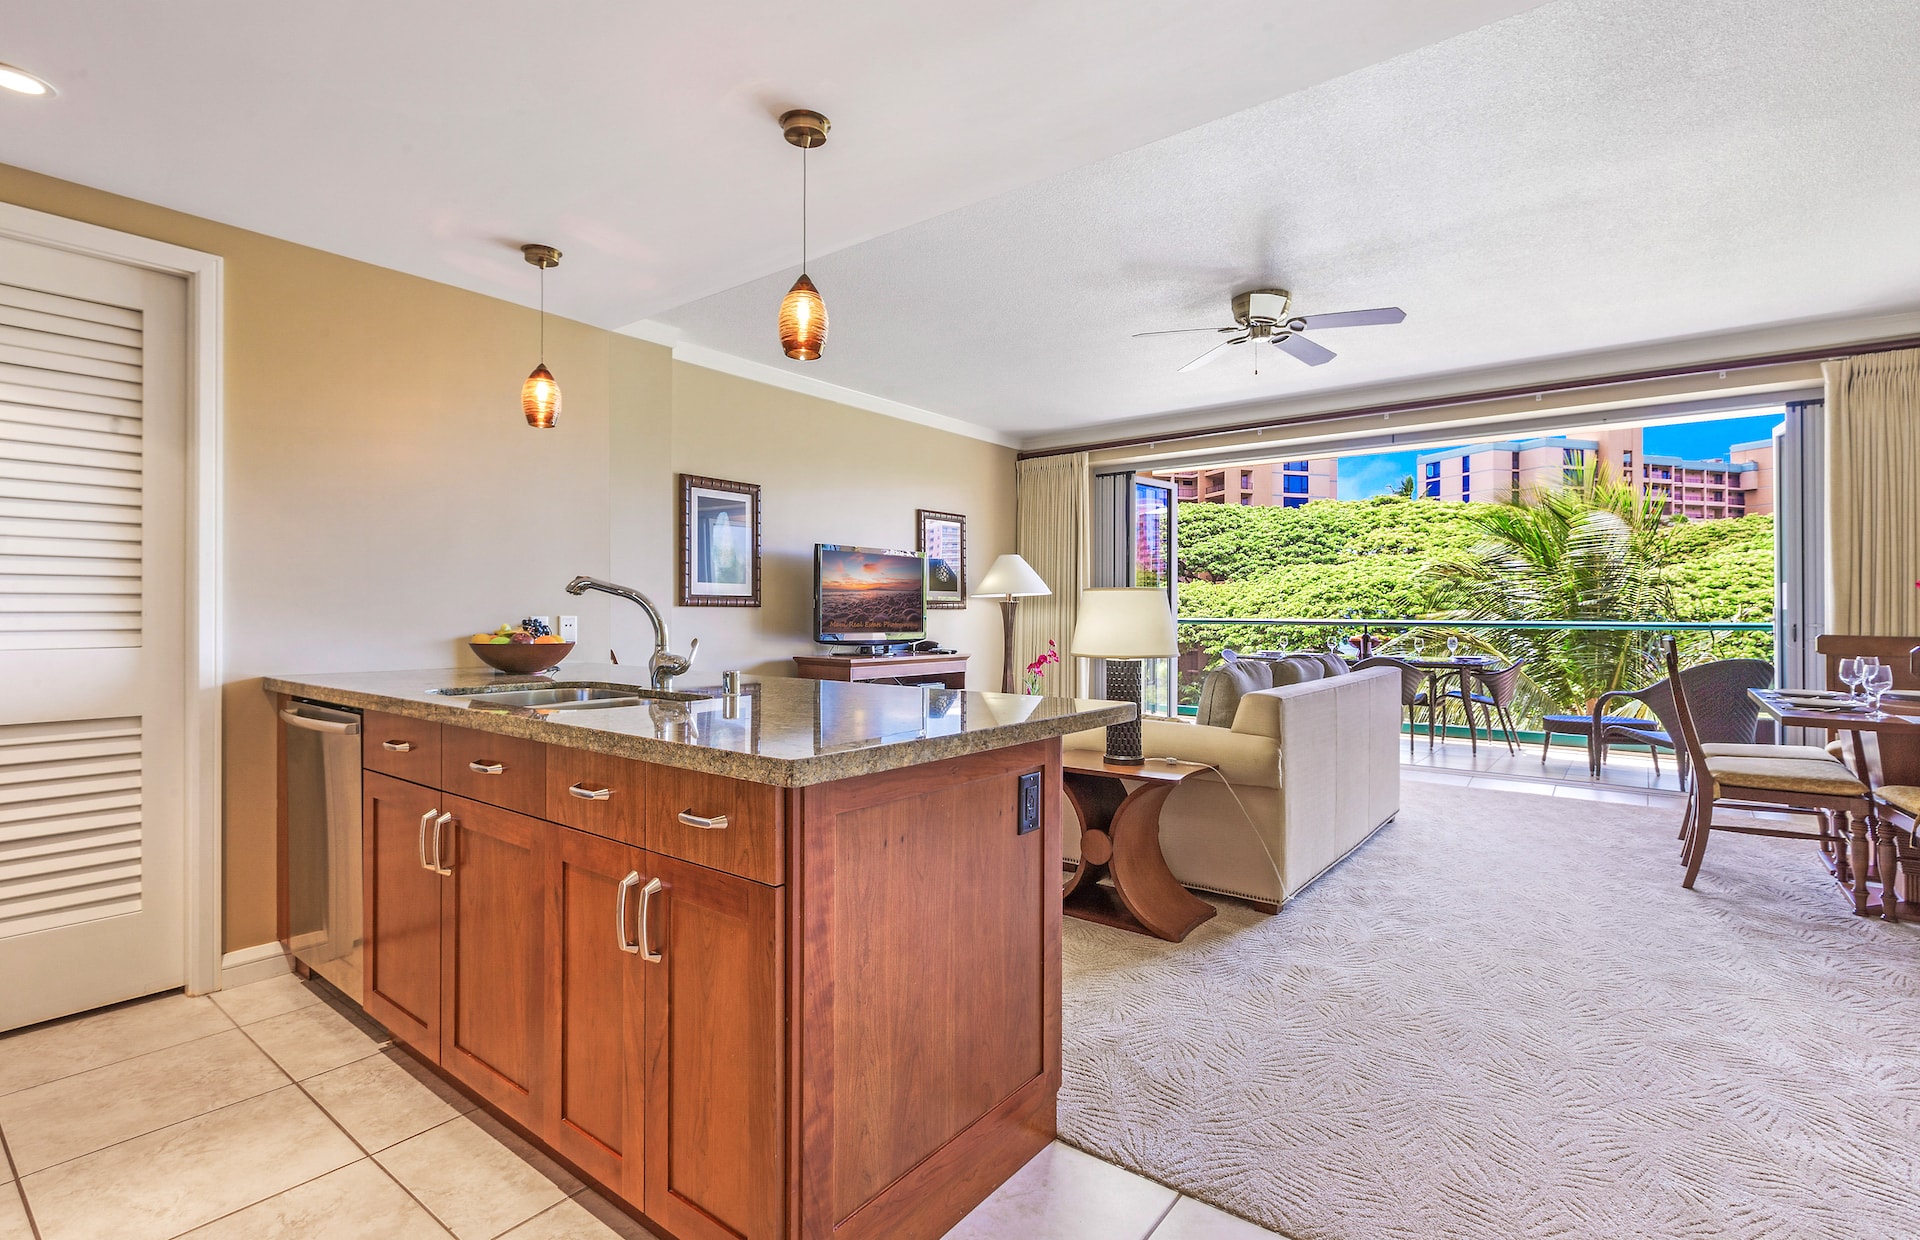 One of the largest one-bedroom floor plans at Honua Kai